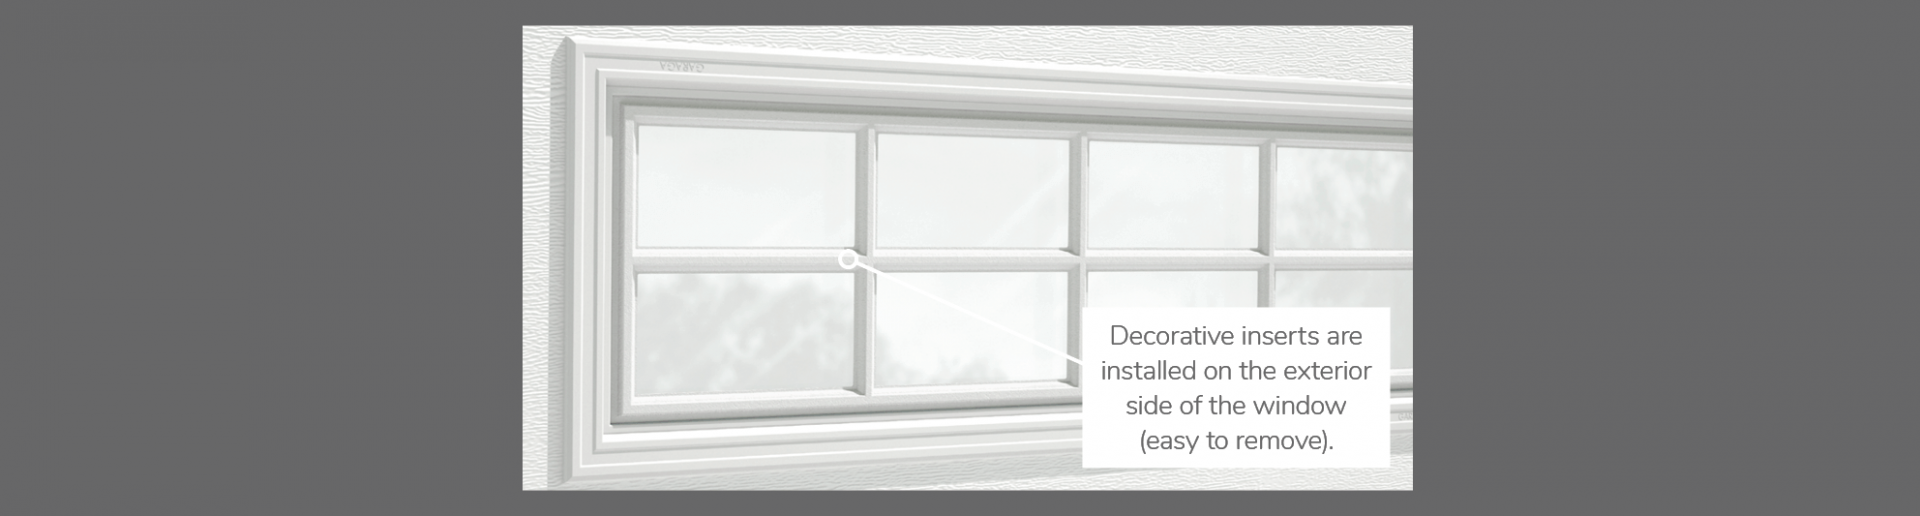 Stockton Decorative Insert, 41" x 16", available for door 3 layers - Polystyrene, 2 layers - Polystyrene and Non-insulated